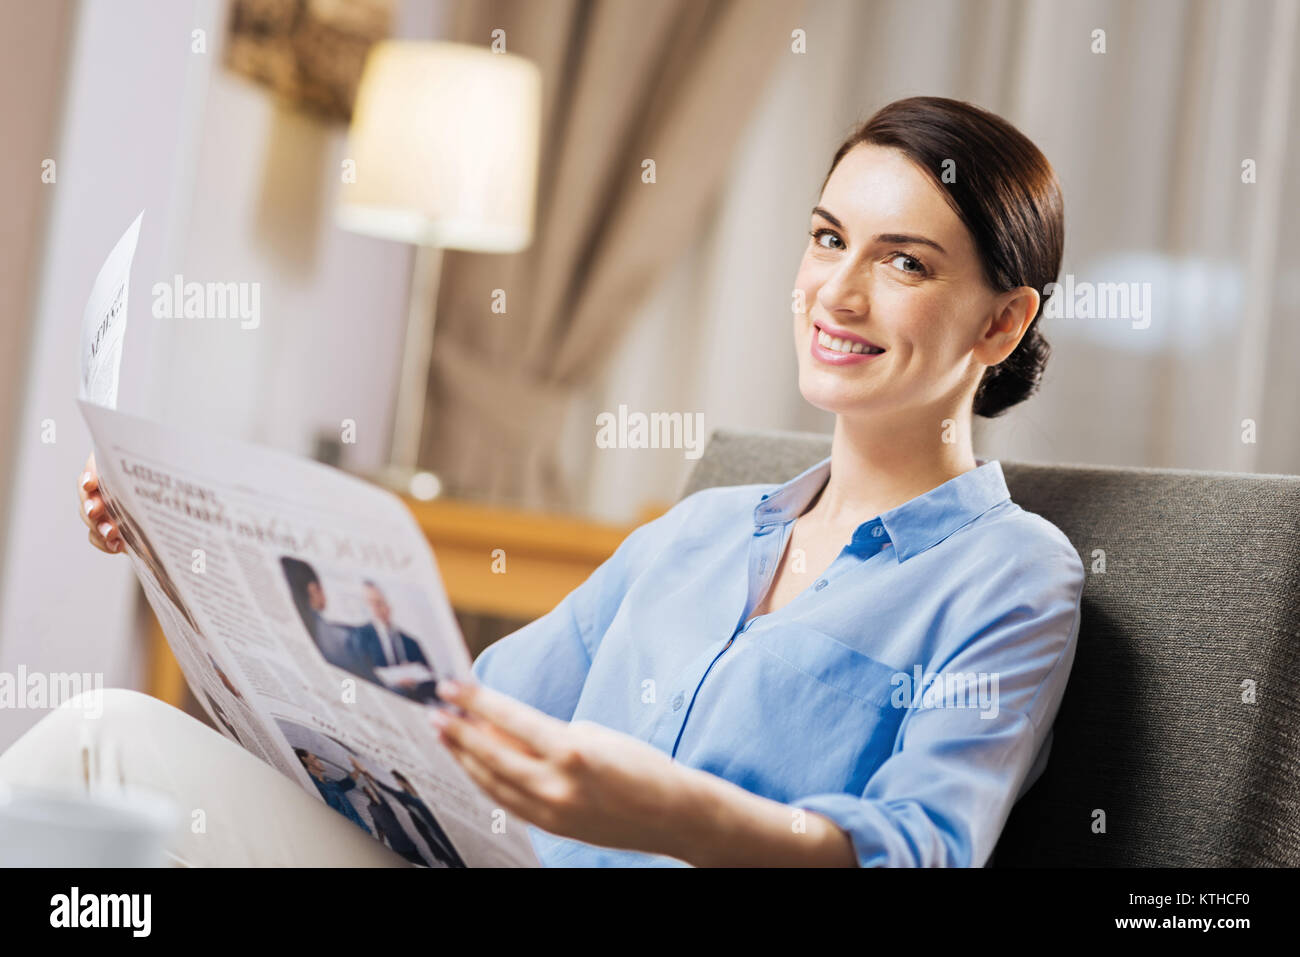 Brunette pleasant woman sitting with newspaper Stock Photo